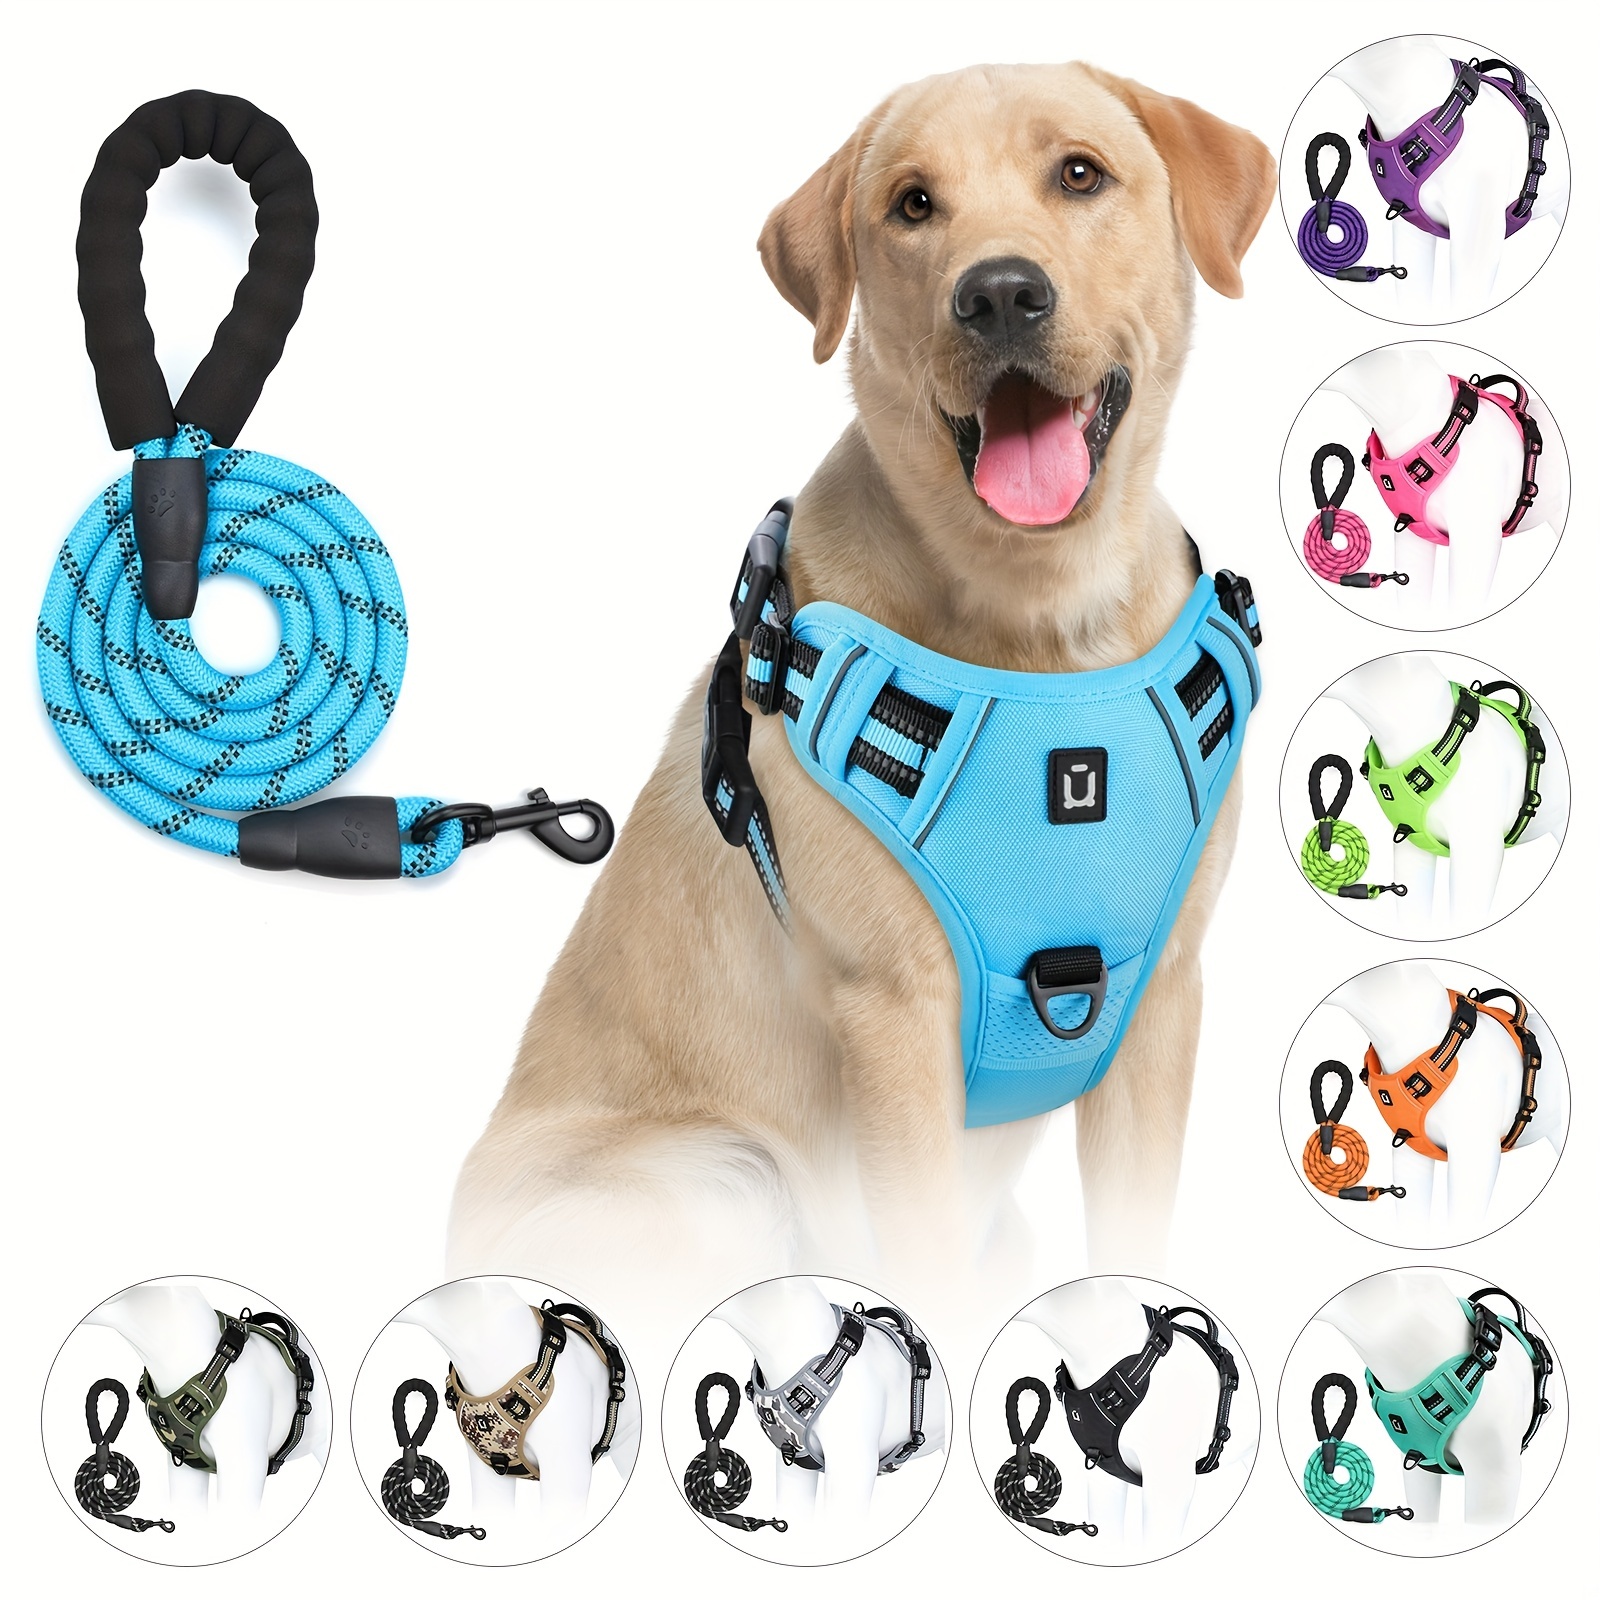 

Dog Harness And Leash Combo, Escape Proof No Pull Vest Harness, With 5 Feet Leash, Reflective Adjustable Soft Padded Pet Harness With Handle For Small To Large Dogs